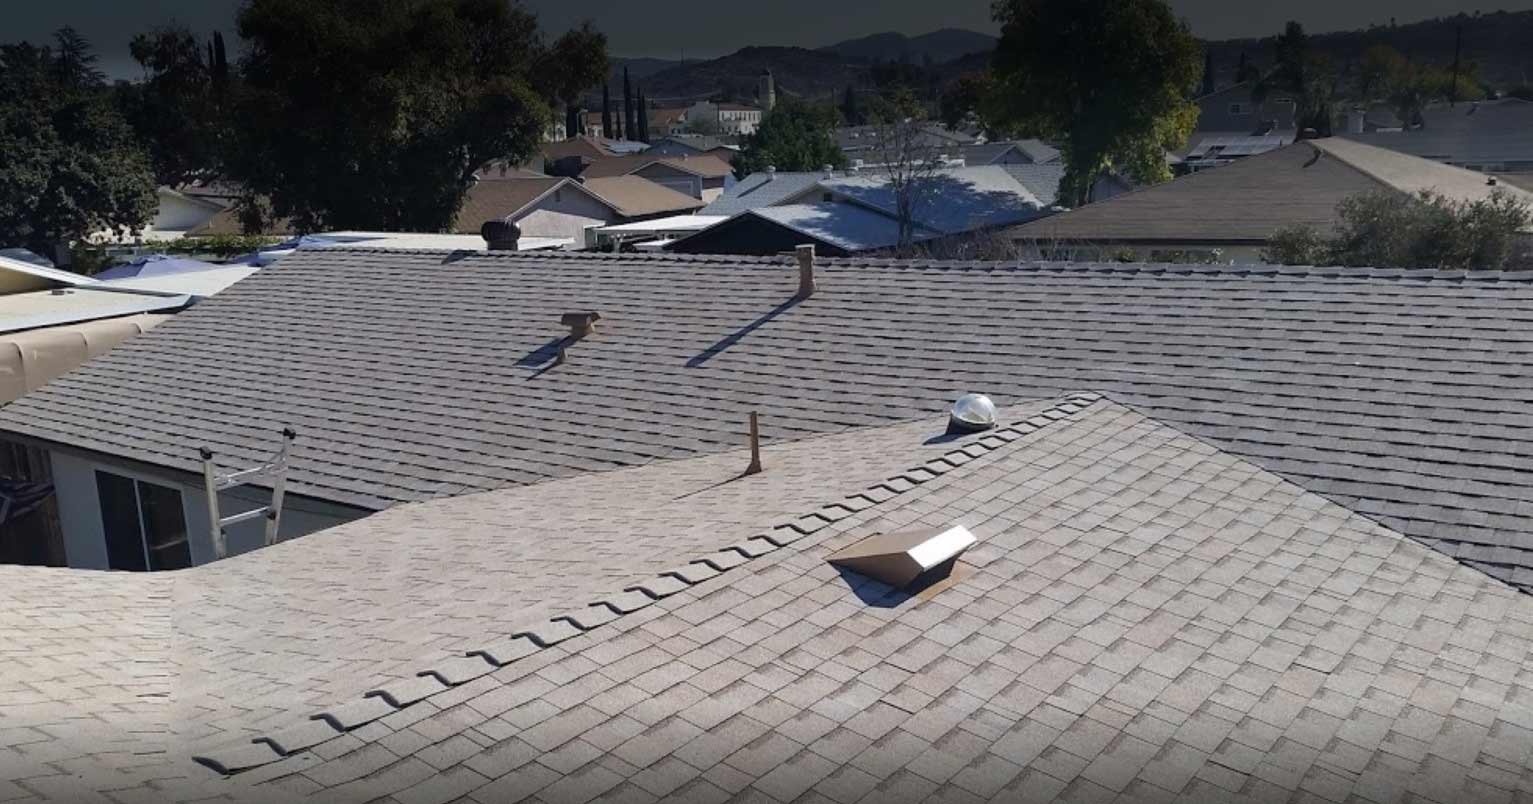 Affordable Roofing Services In San Diego — Huge Roof Getting Fixed in Lakeside, CA